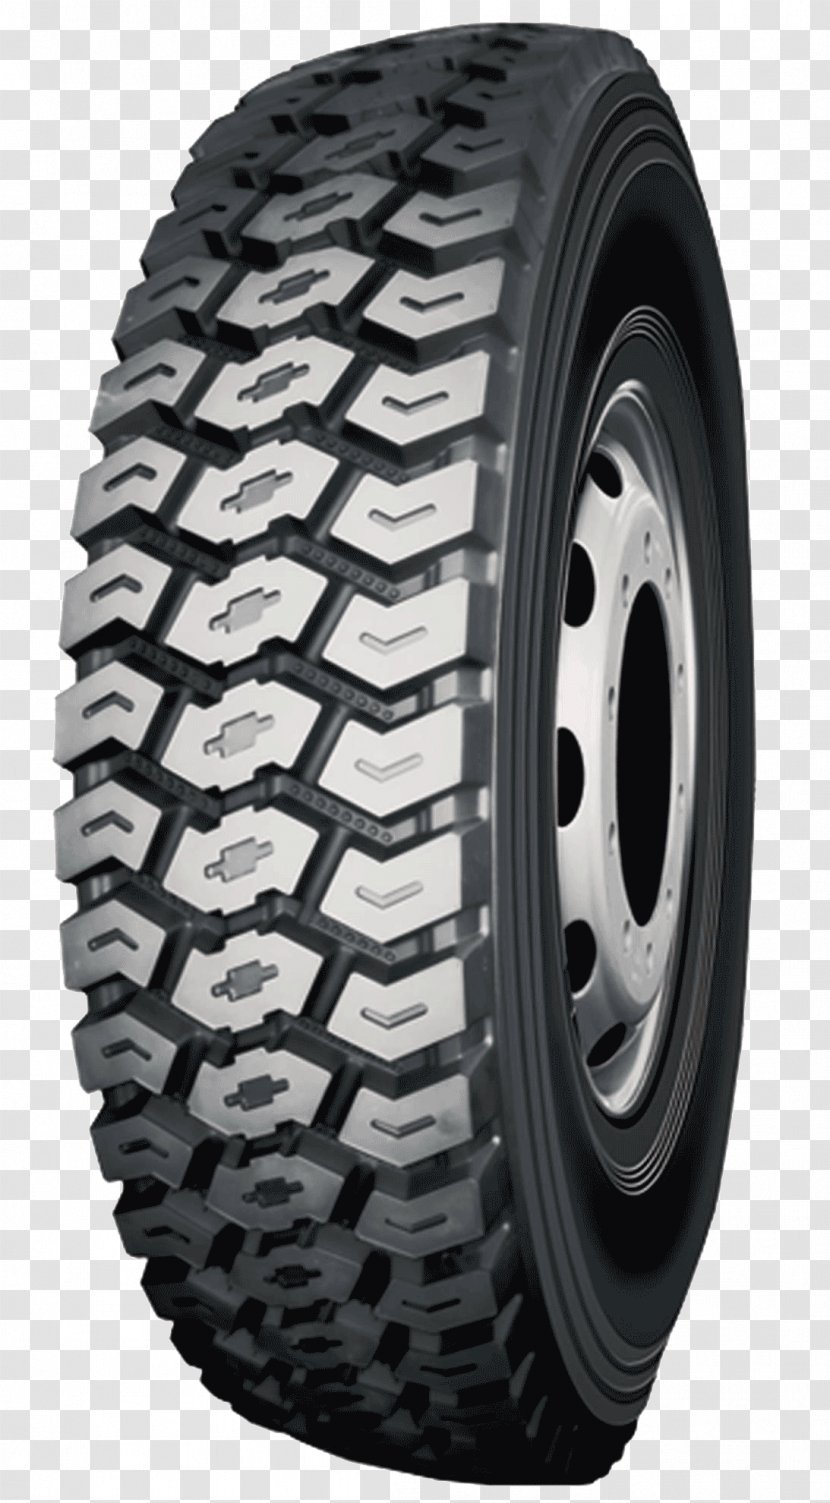 Goodyear Tire And Rubber Company Truck Radial Michelin - Tires Transparent PNG